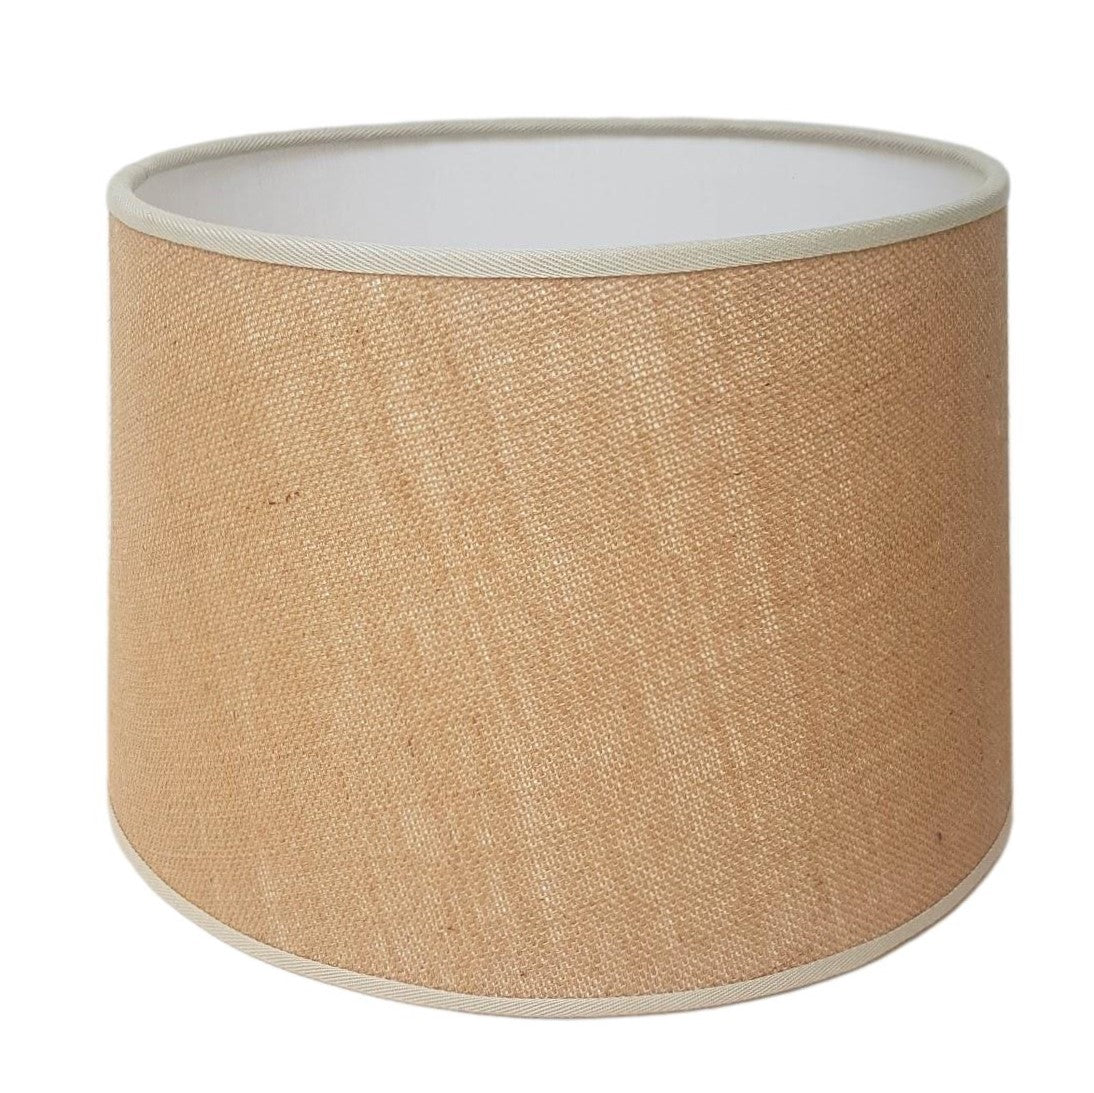 Munro and Kerr natural hessian drum lampshade with coloured binding trim